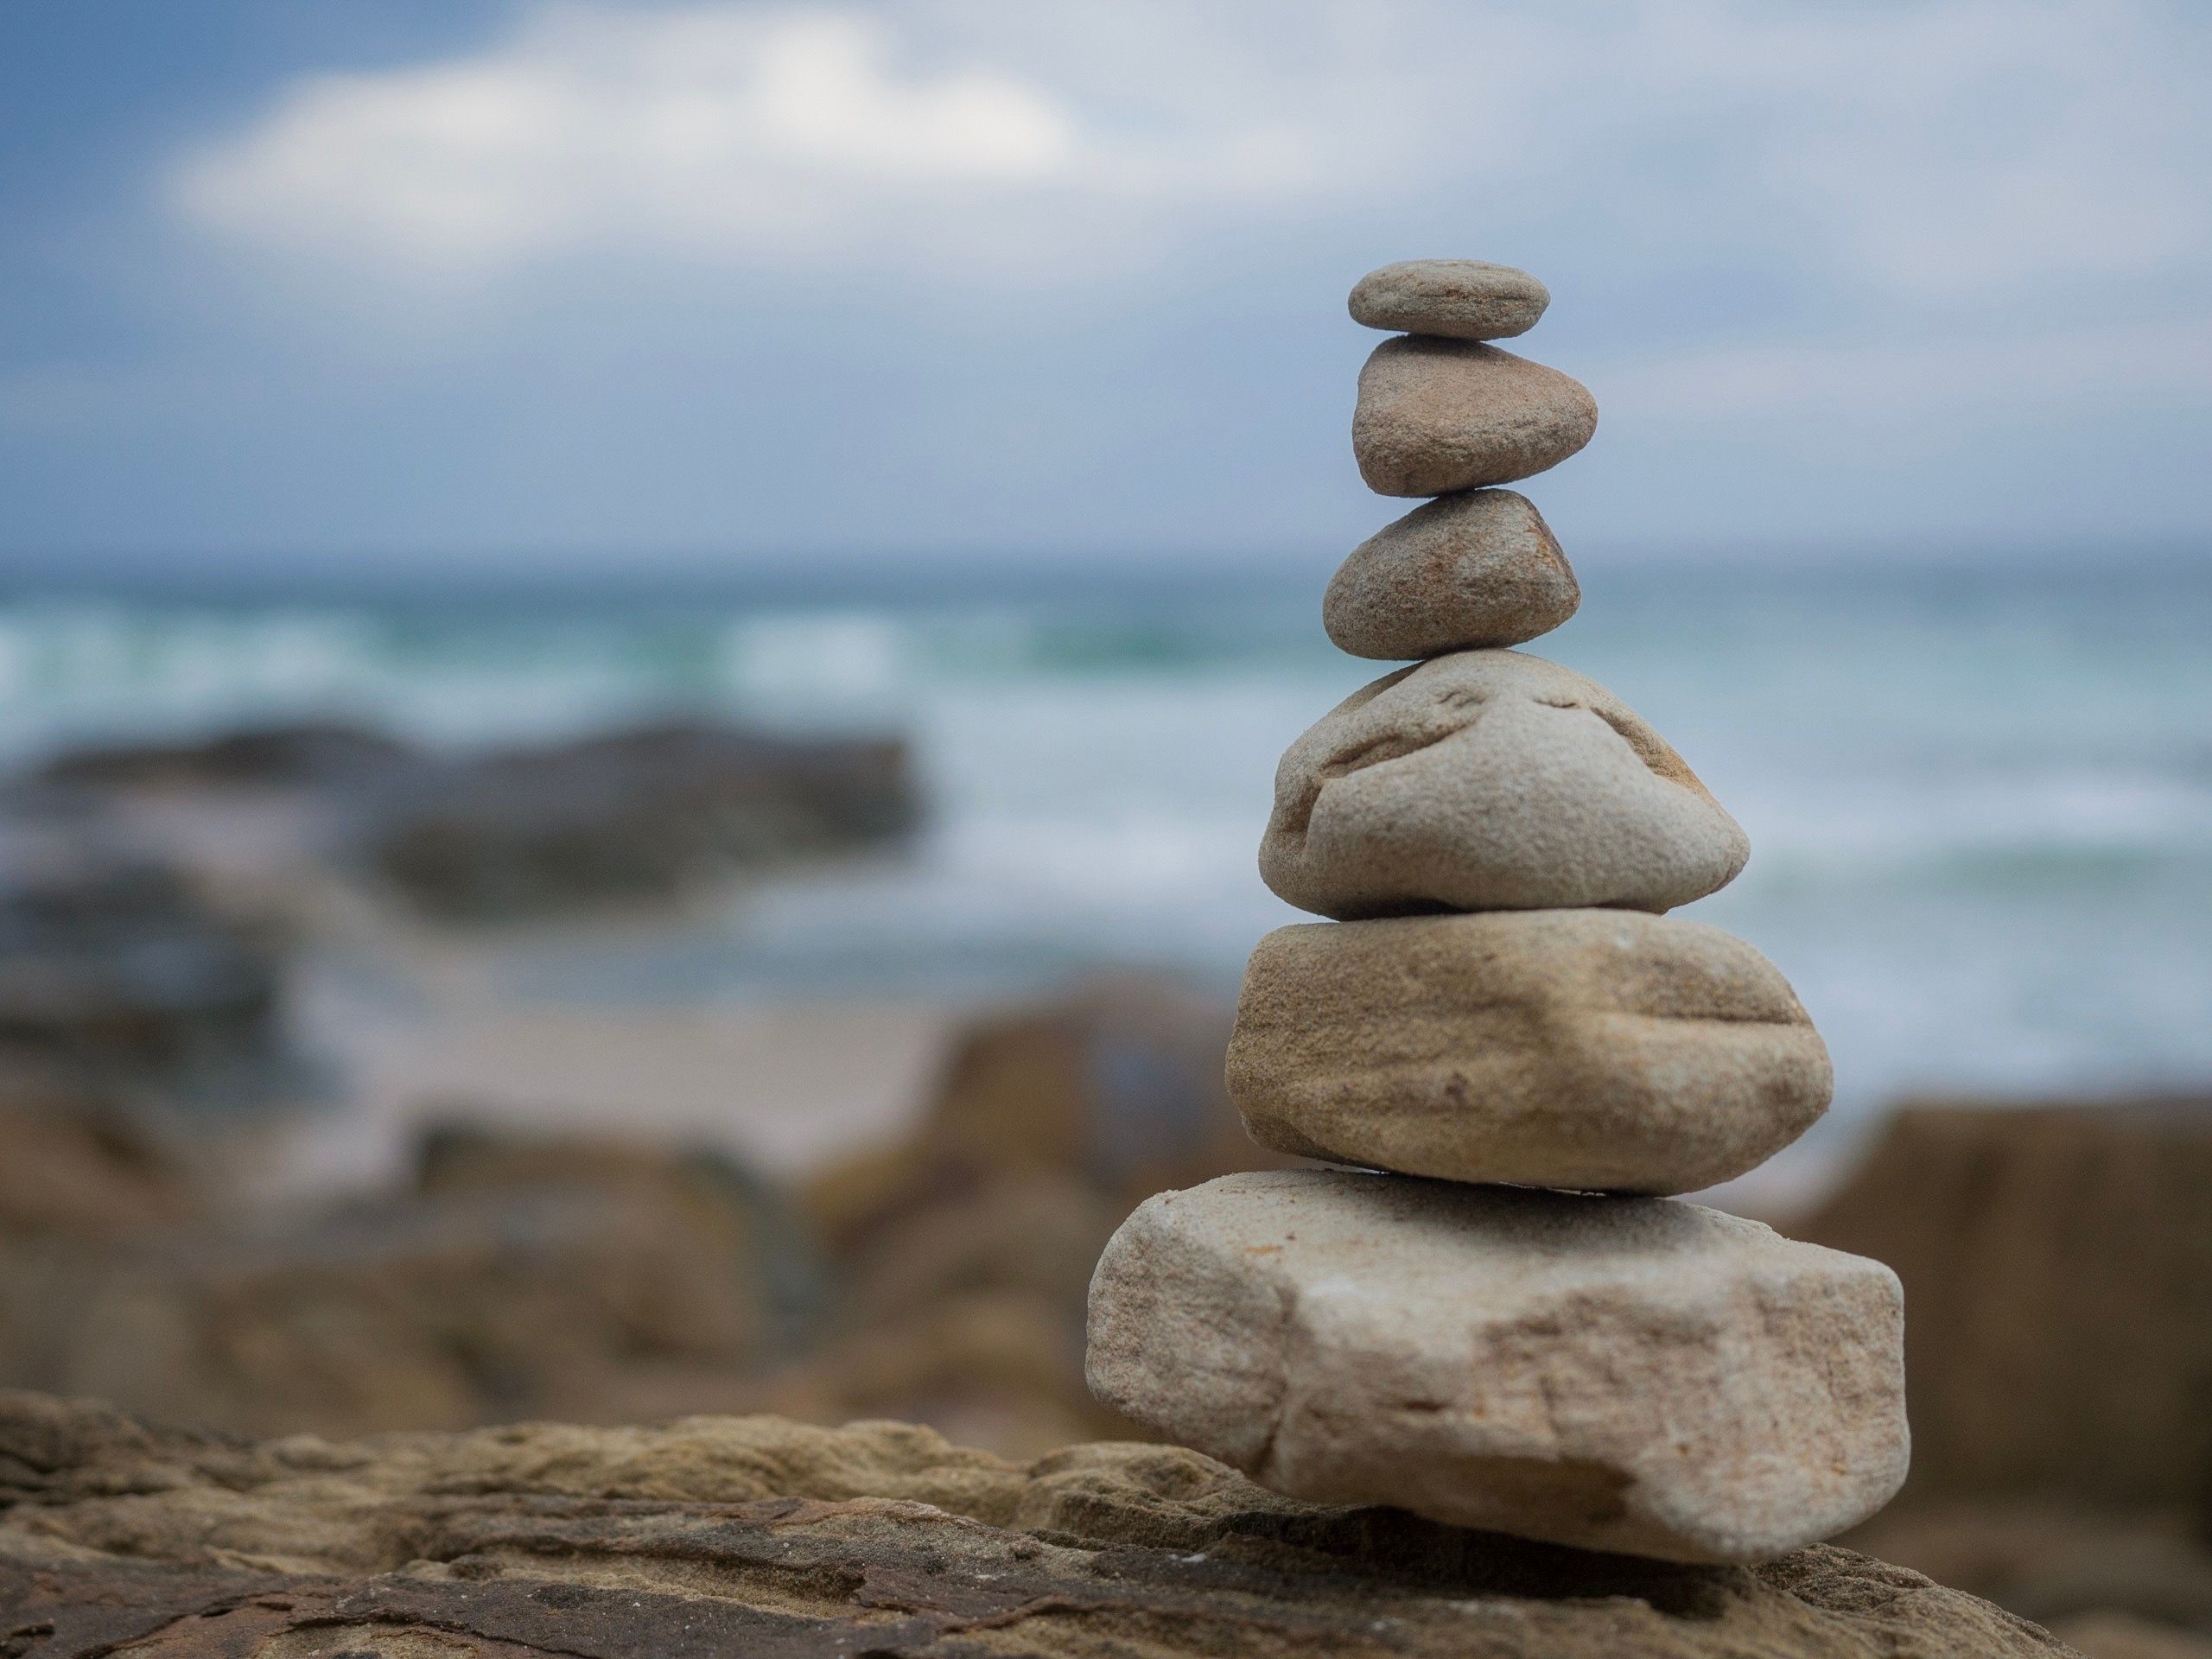 Cairn,Of,Stacked,Rocks,Against,The,Beautiful,Ocean,Background,,Representing